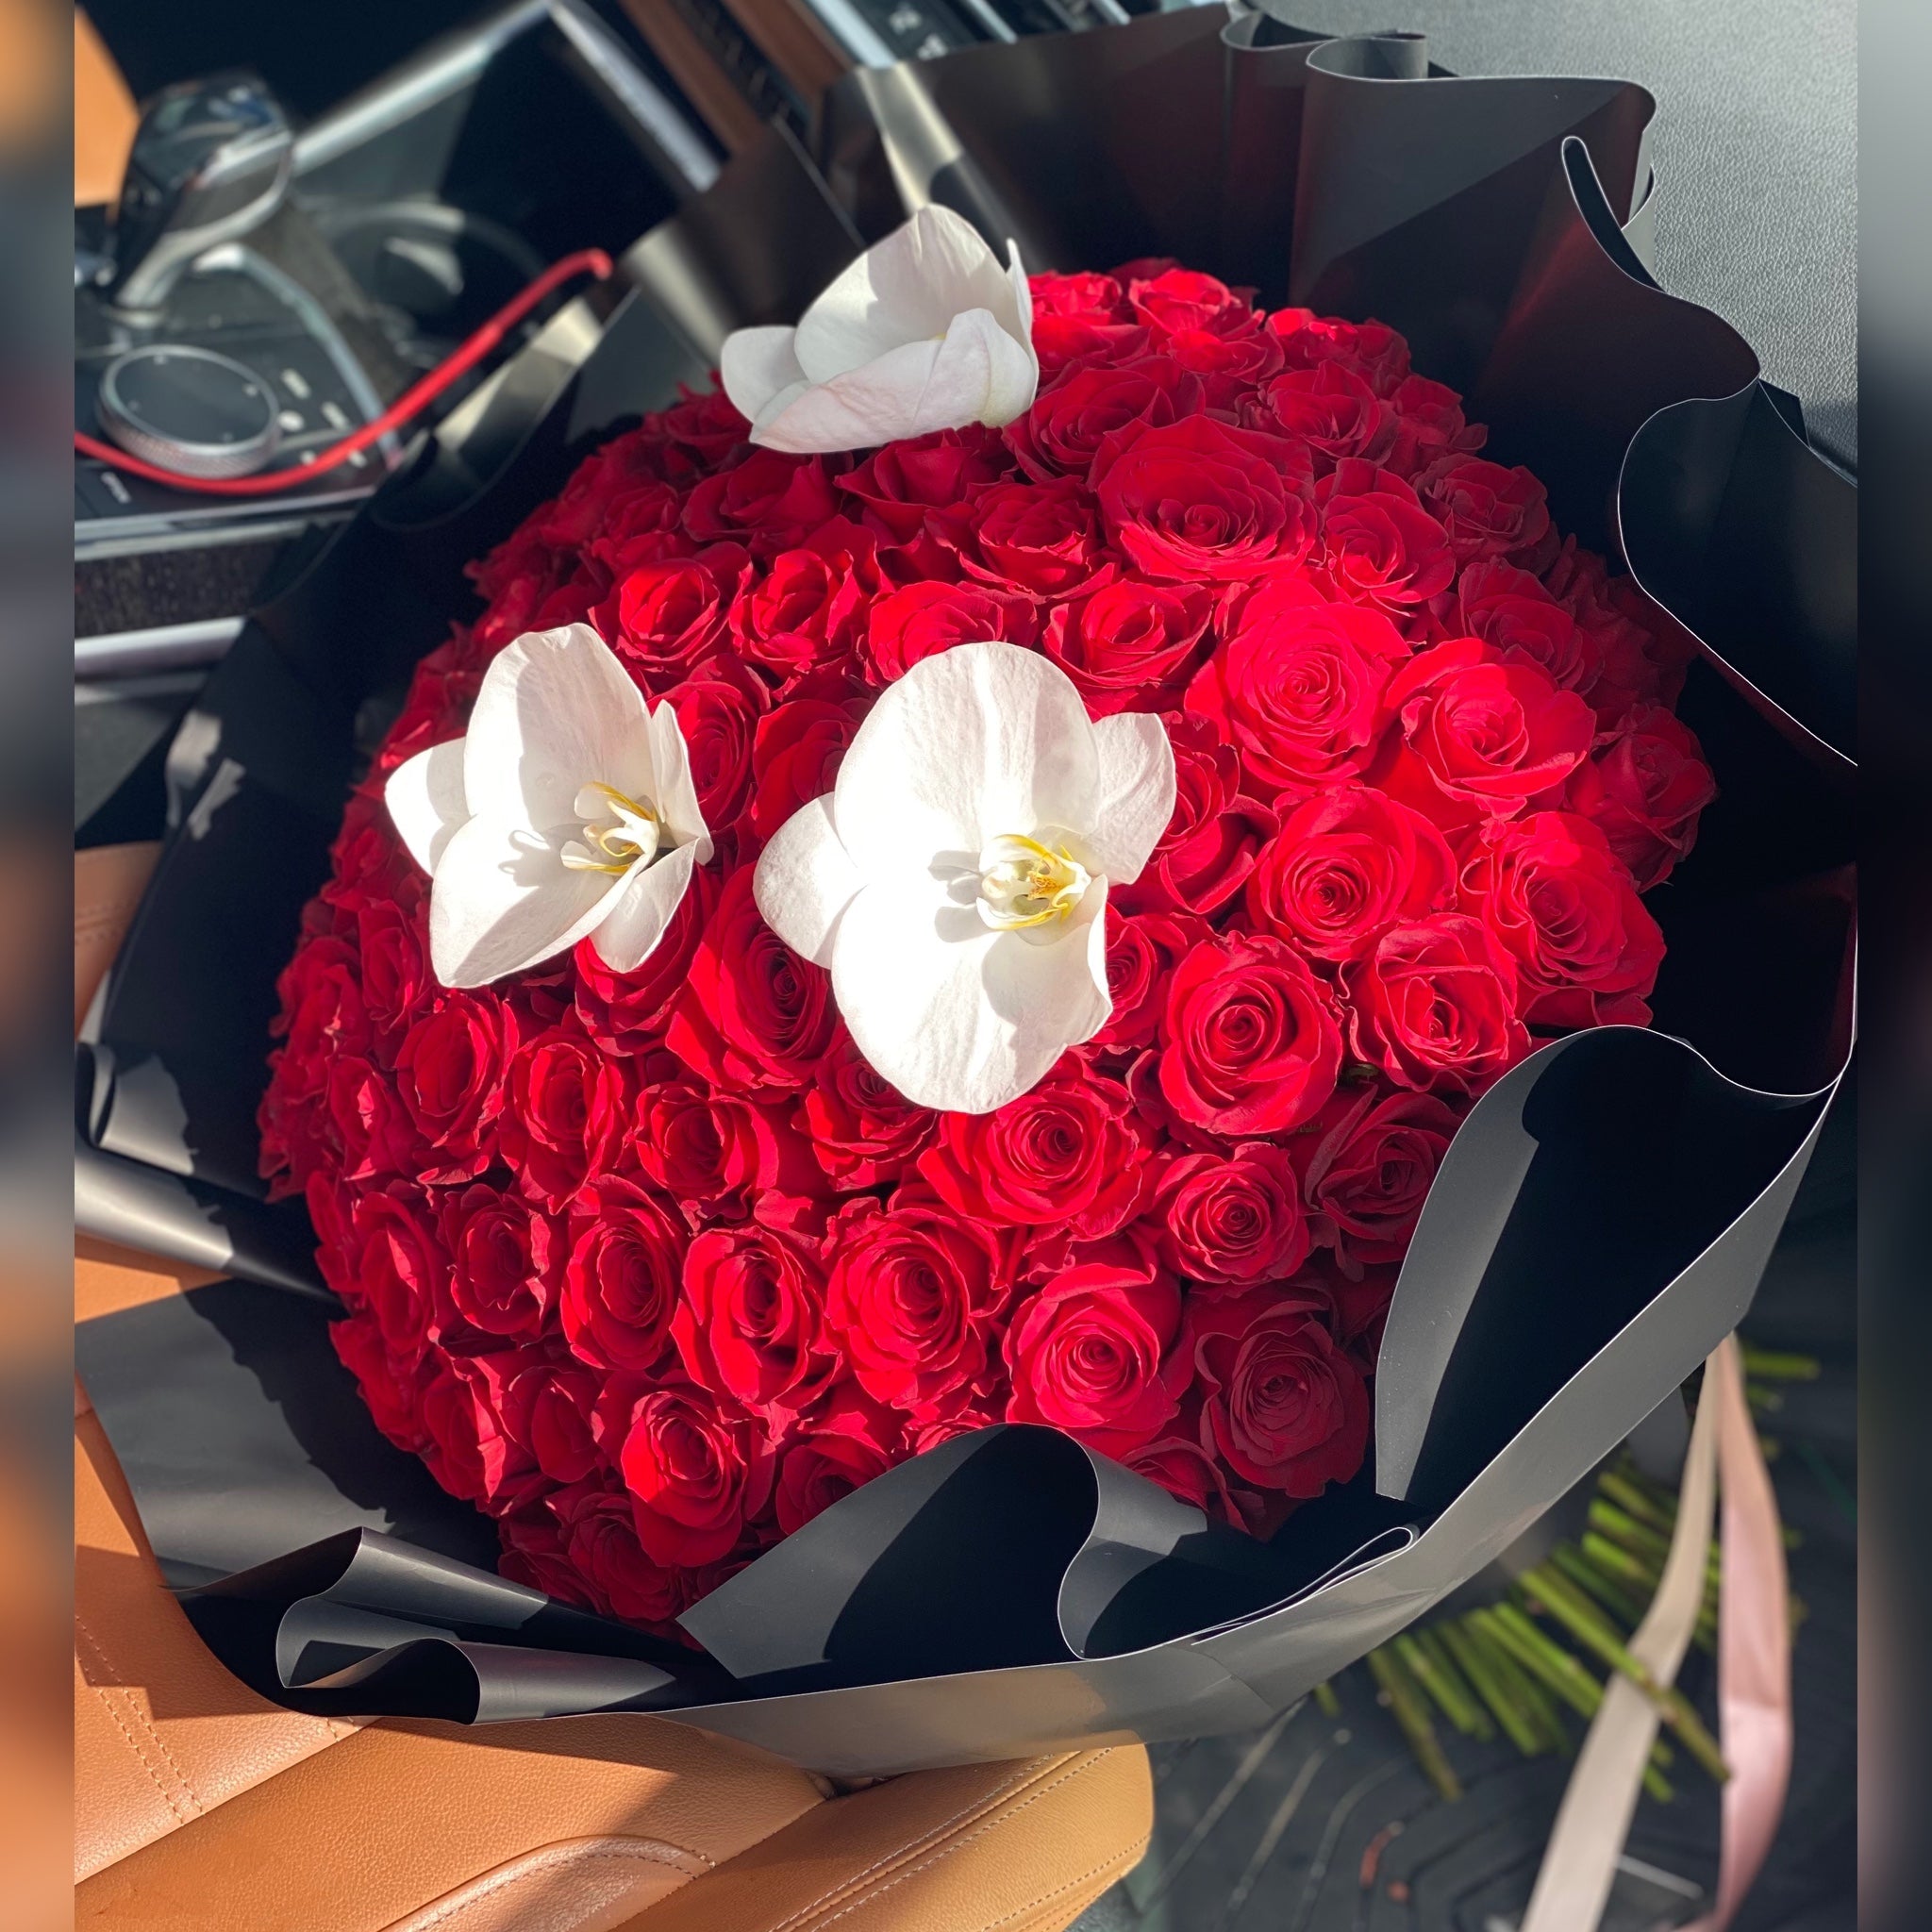 52 Roses Brown Paper Bouquet by West Hollywood Florist